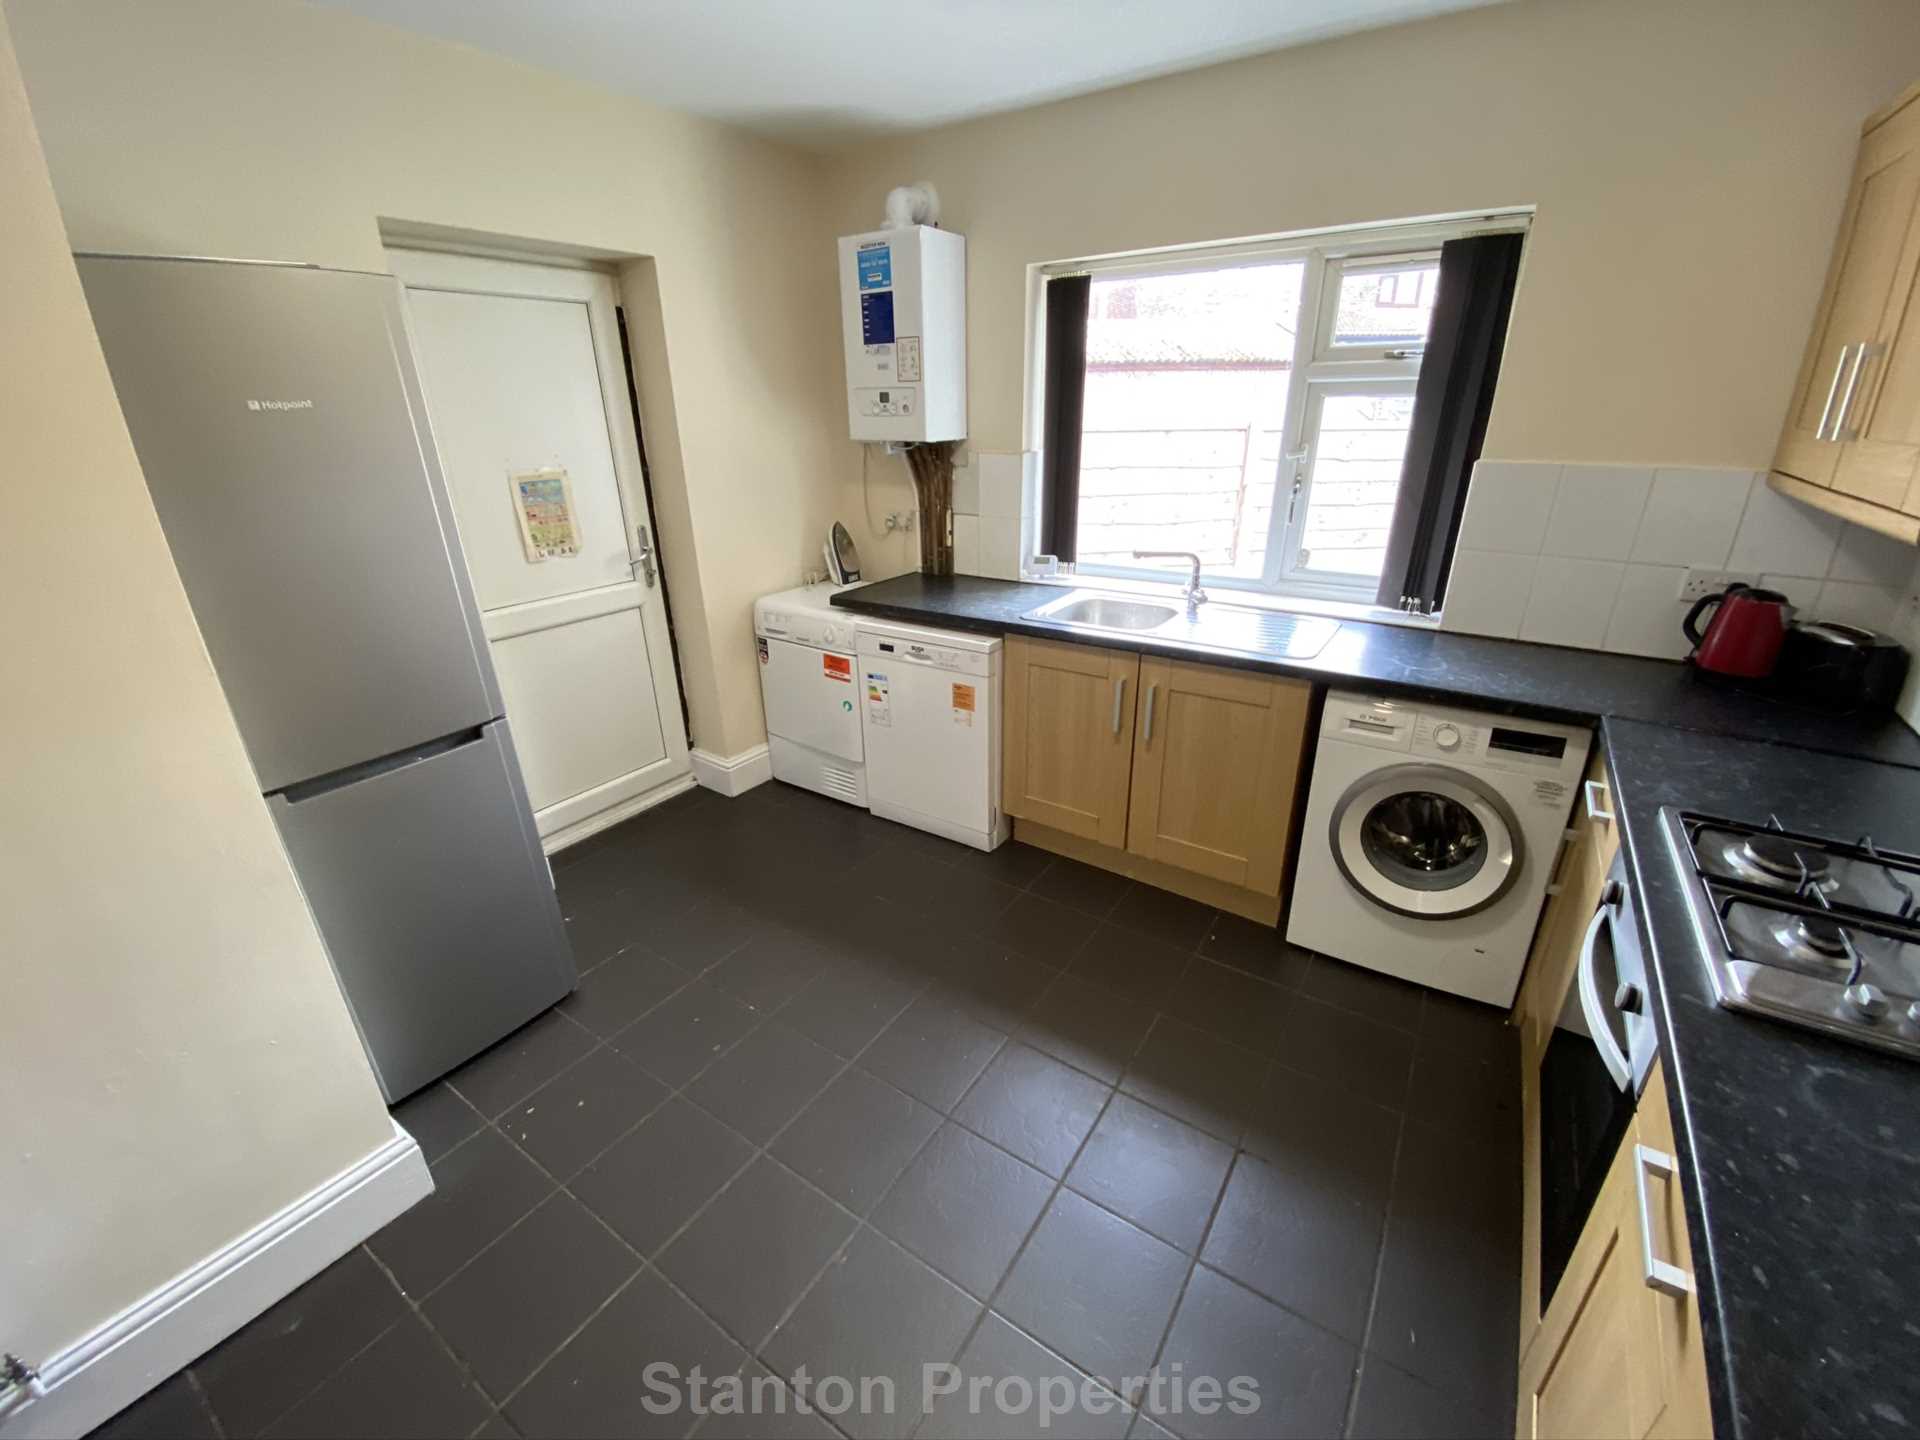 £120 pppw, Weld Road, Withington, Image 3